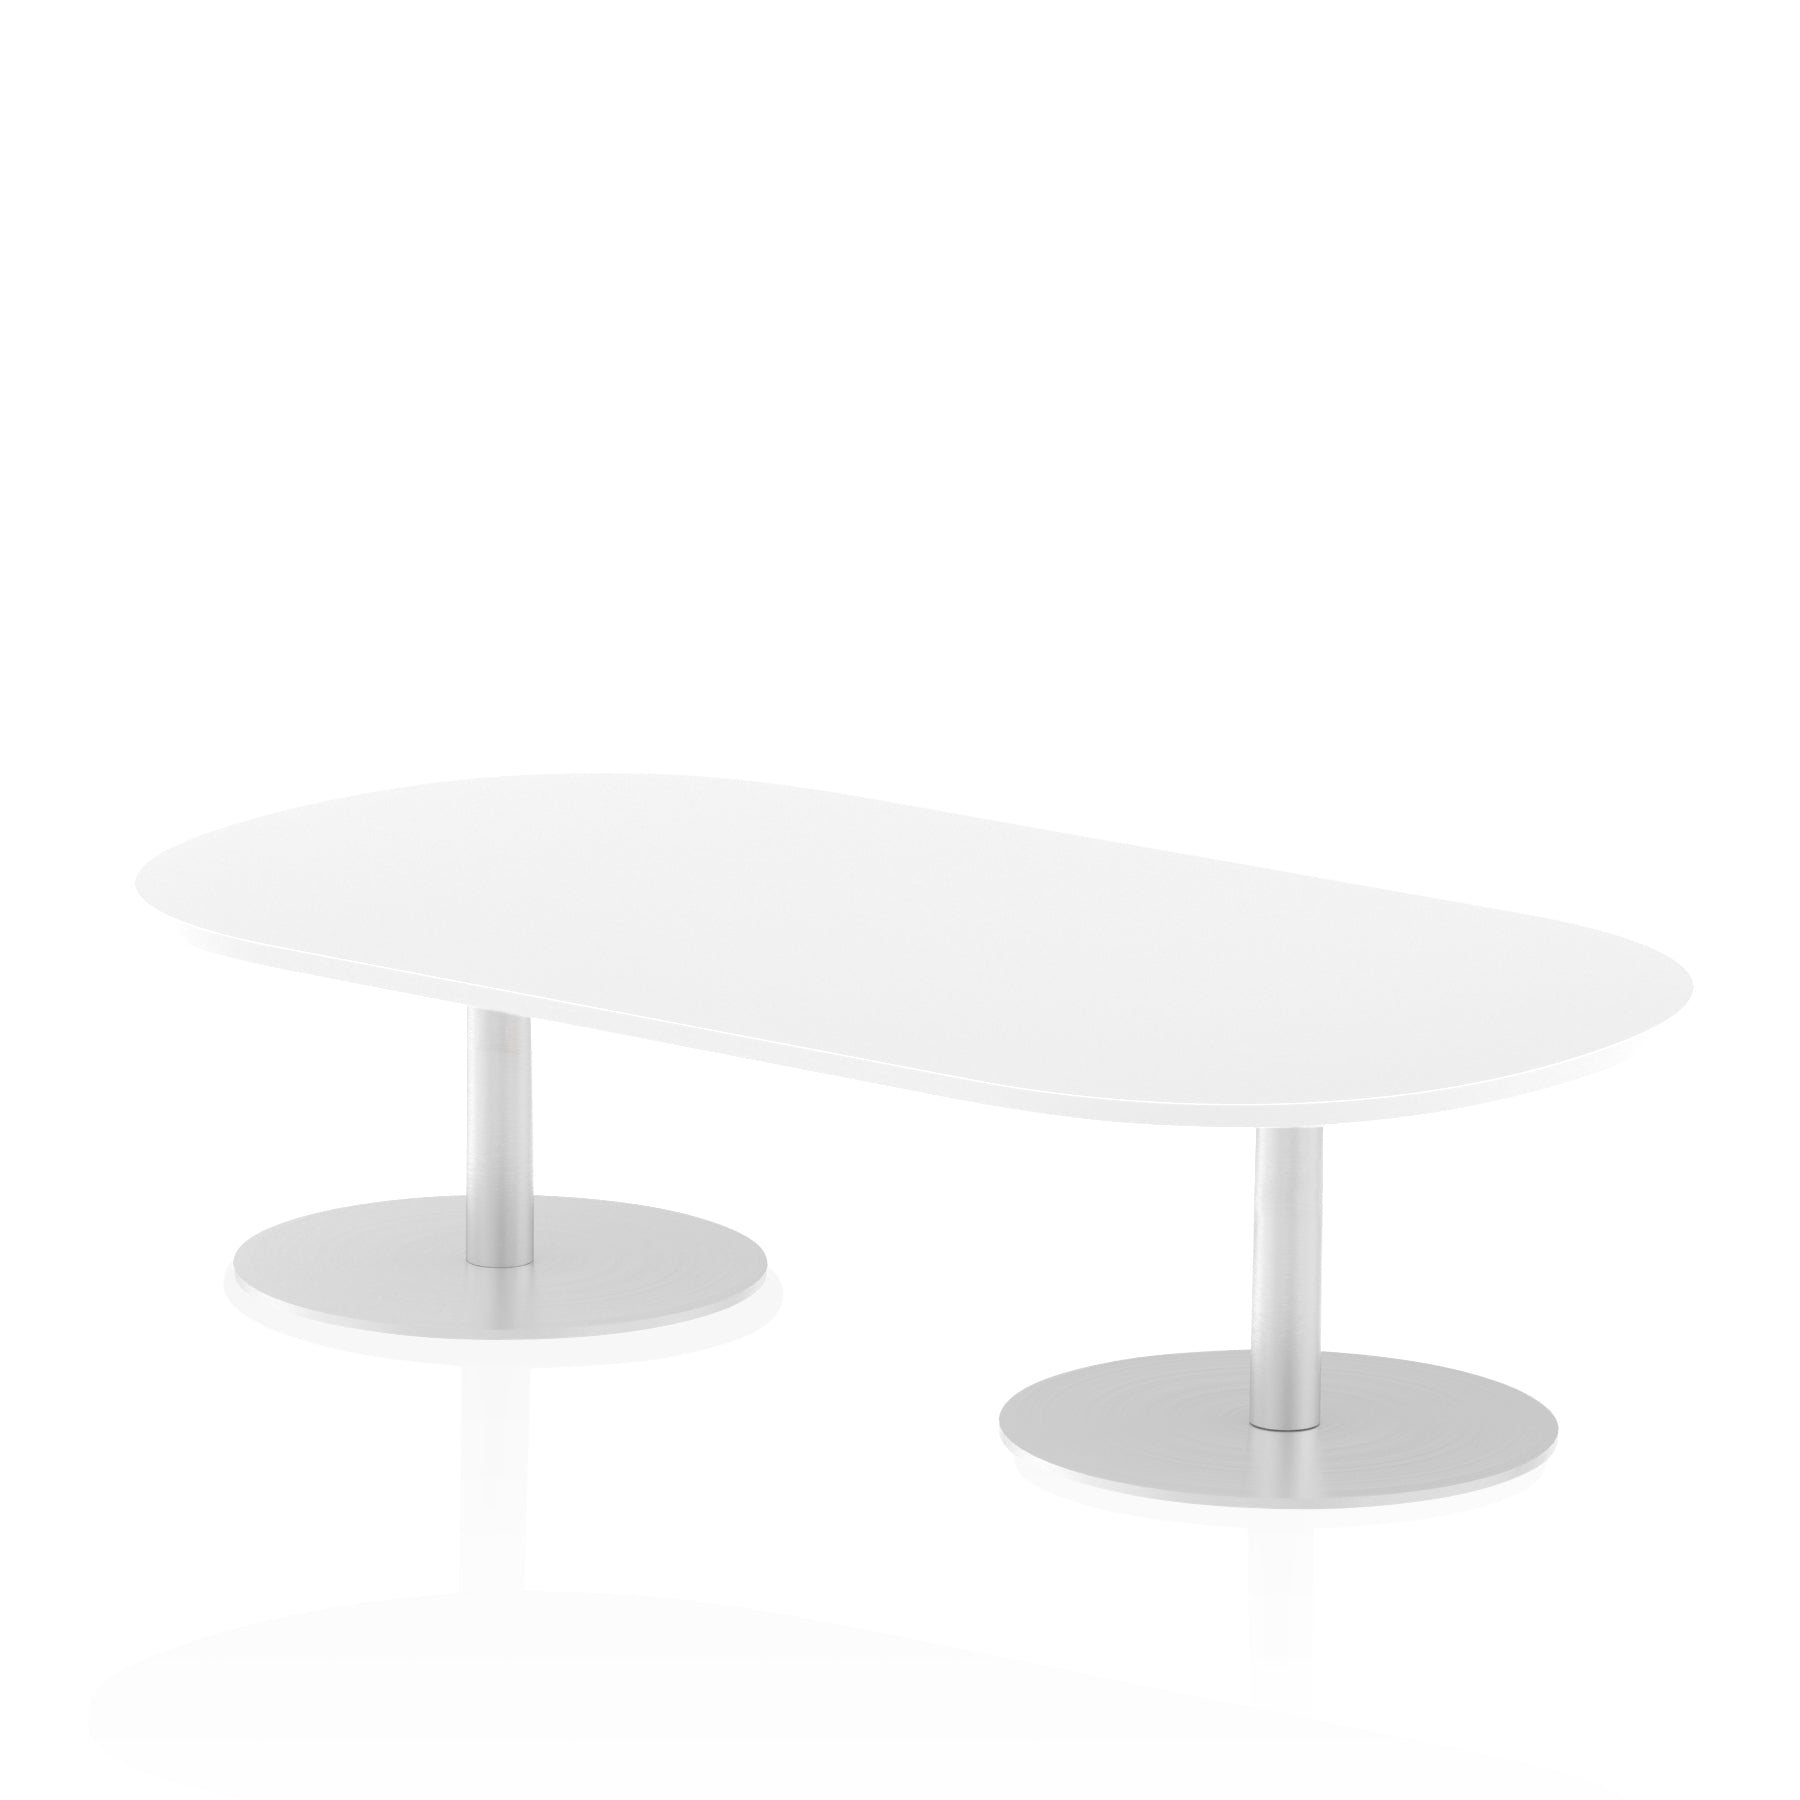 Italia D-End Boardroom Table - MFC Material, Self-Assembly, 5-Year Guarantee, Bistro Leg, Silver Frame, 1800x1000 or 2400x1000mm